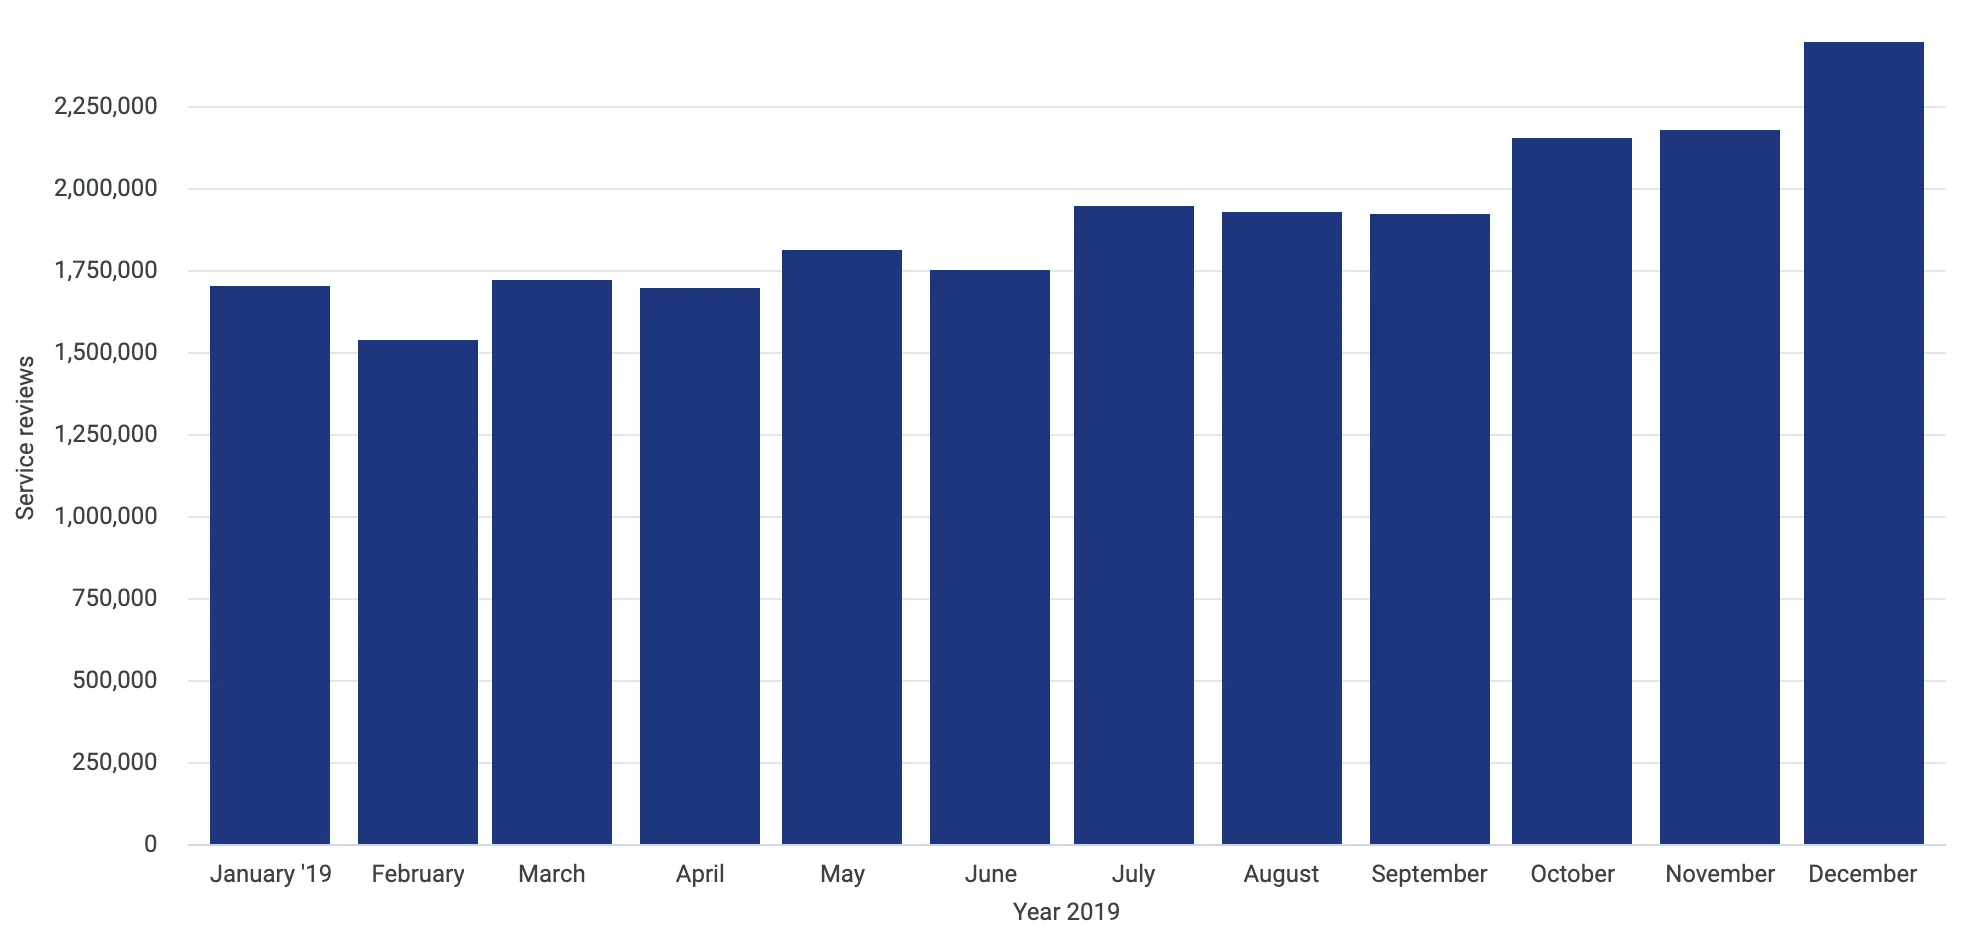 Service reviews left on Trustpilot.com between January 1st 2019 and December 31st 2019. Here, we can observe a significant increase in service reviews from October onwards.